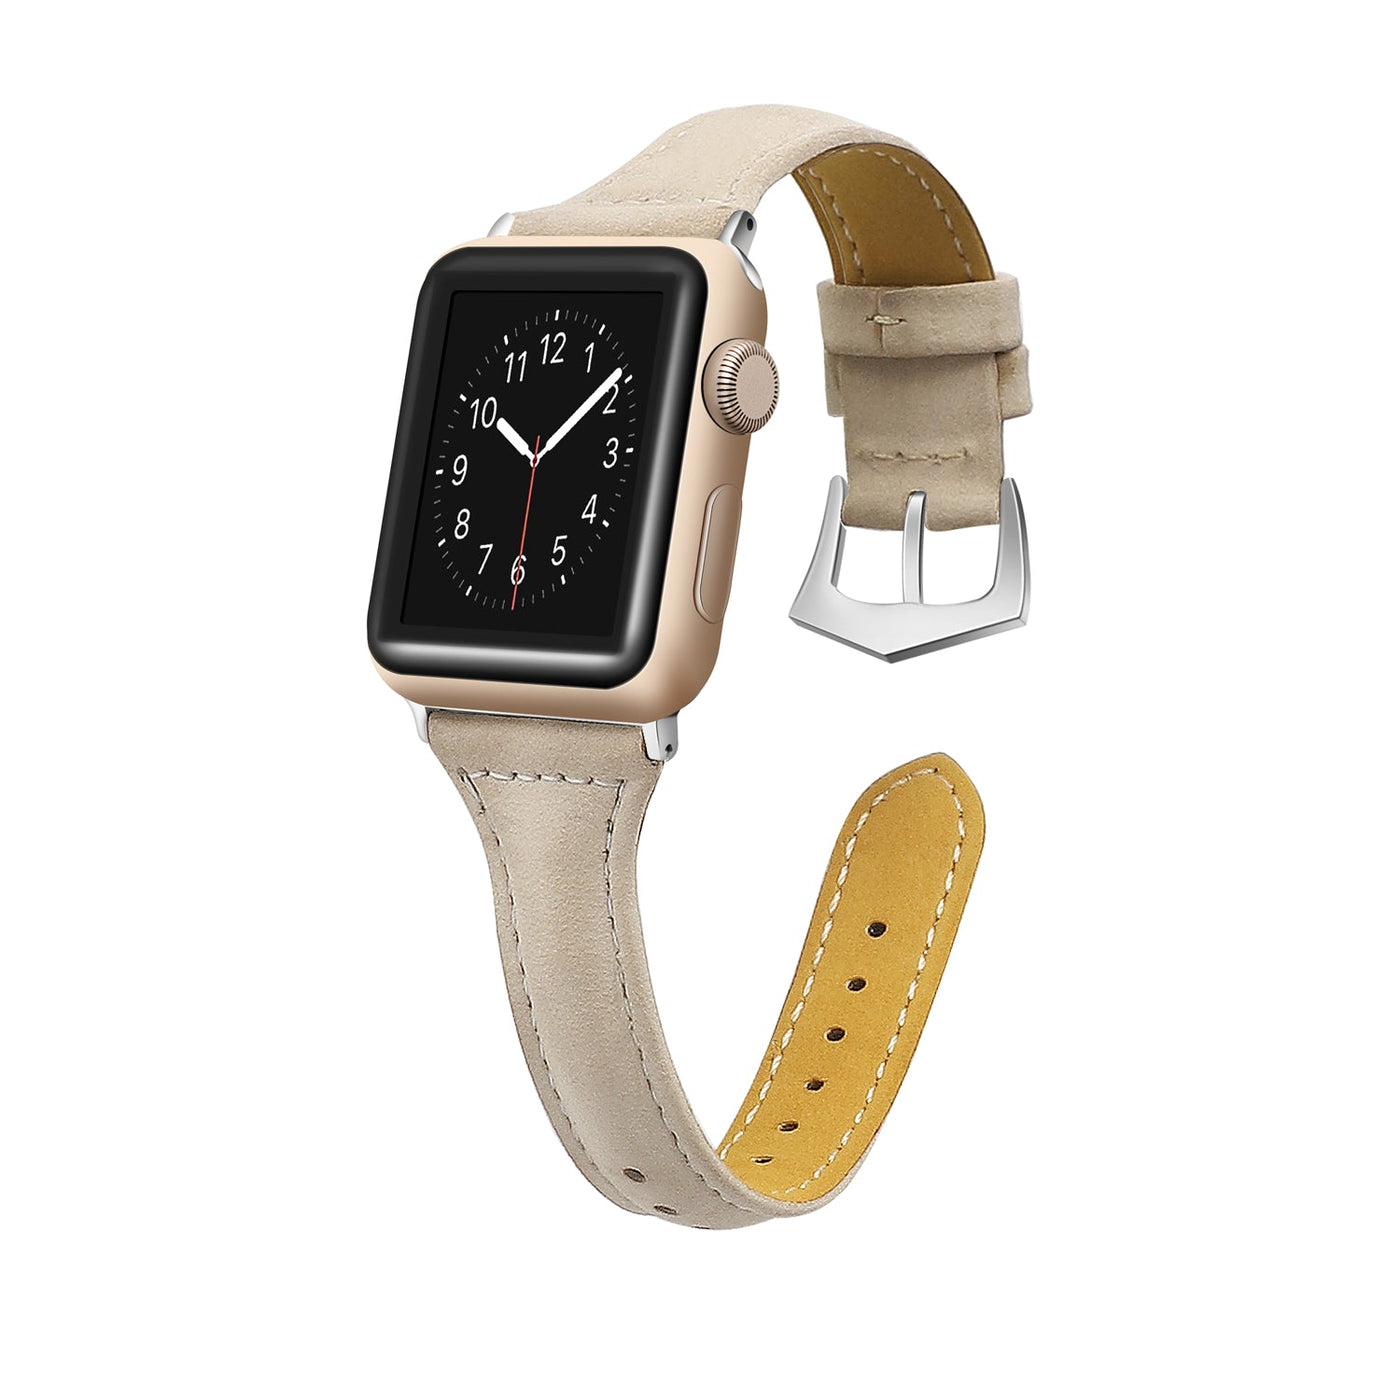 ALK Timeless Leather Band for Apple Watch in Smart Beige